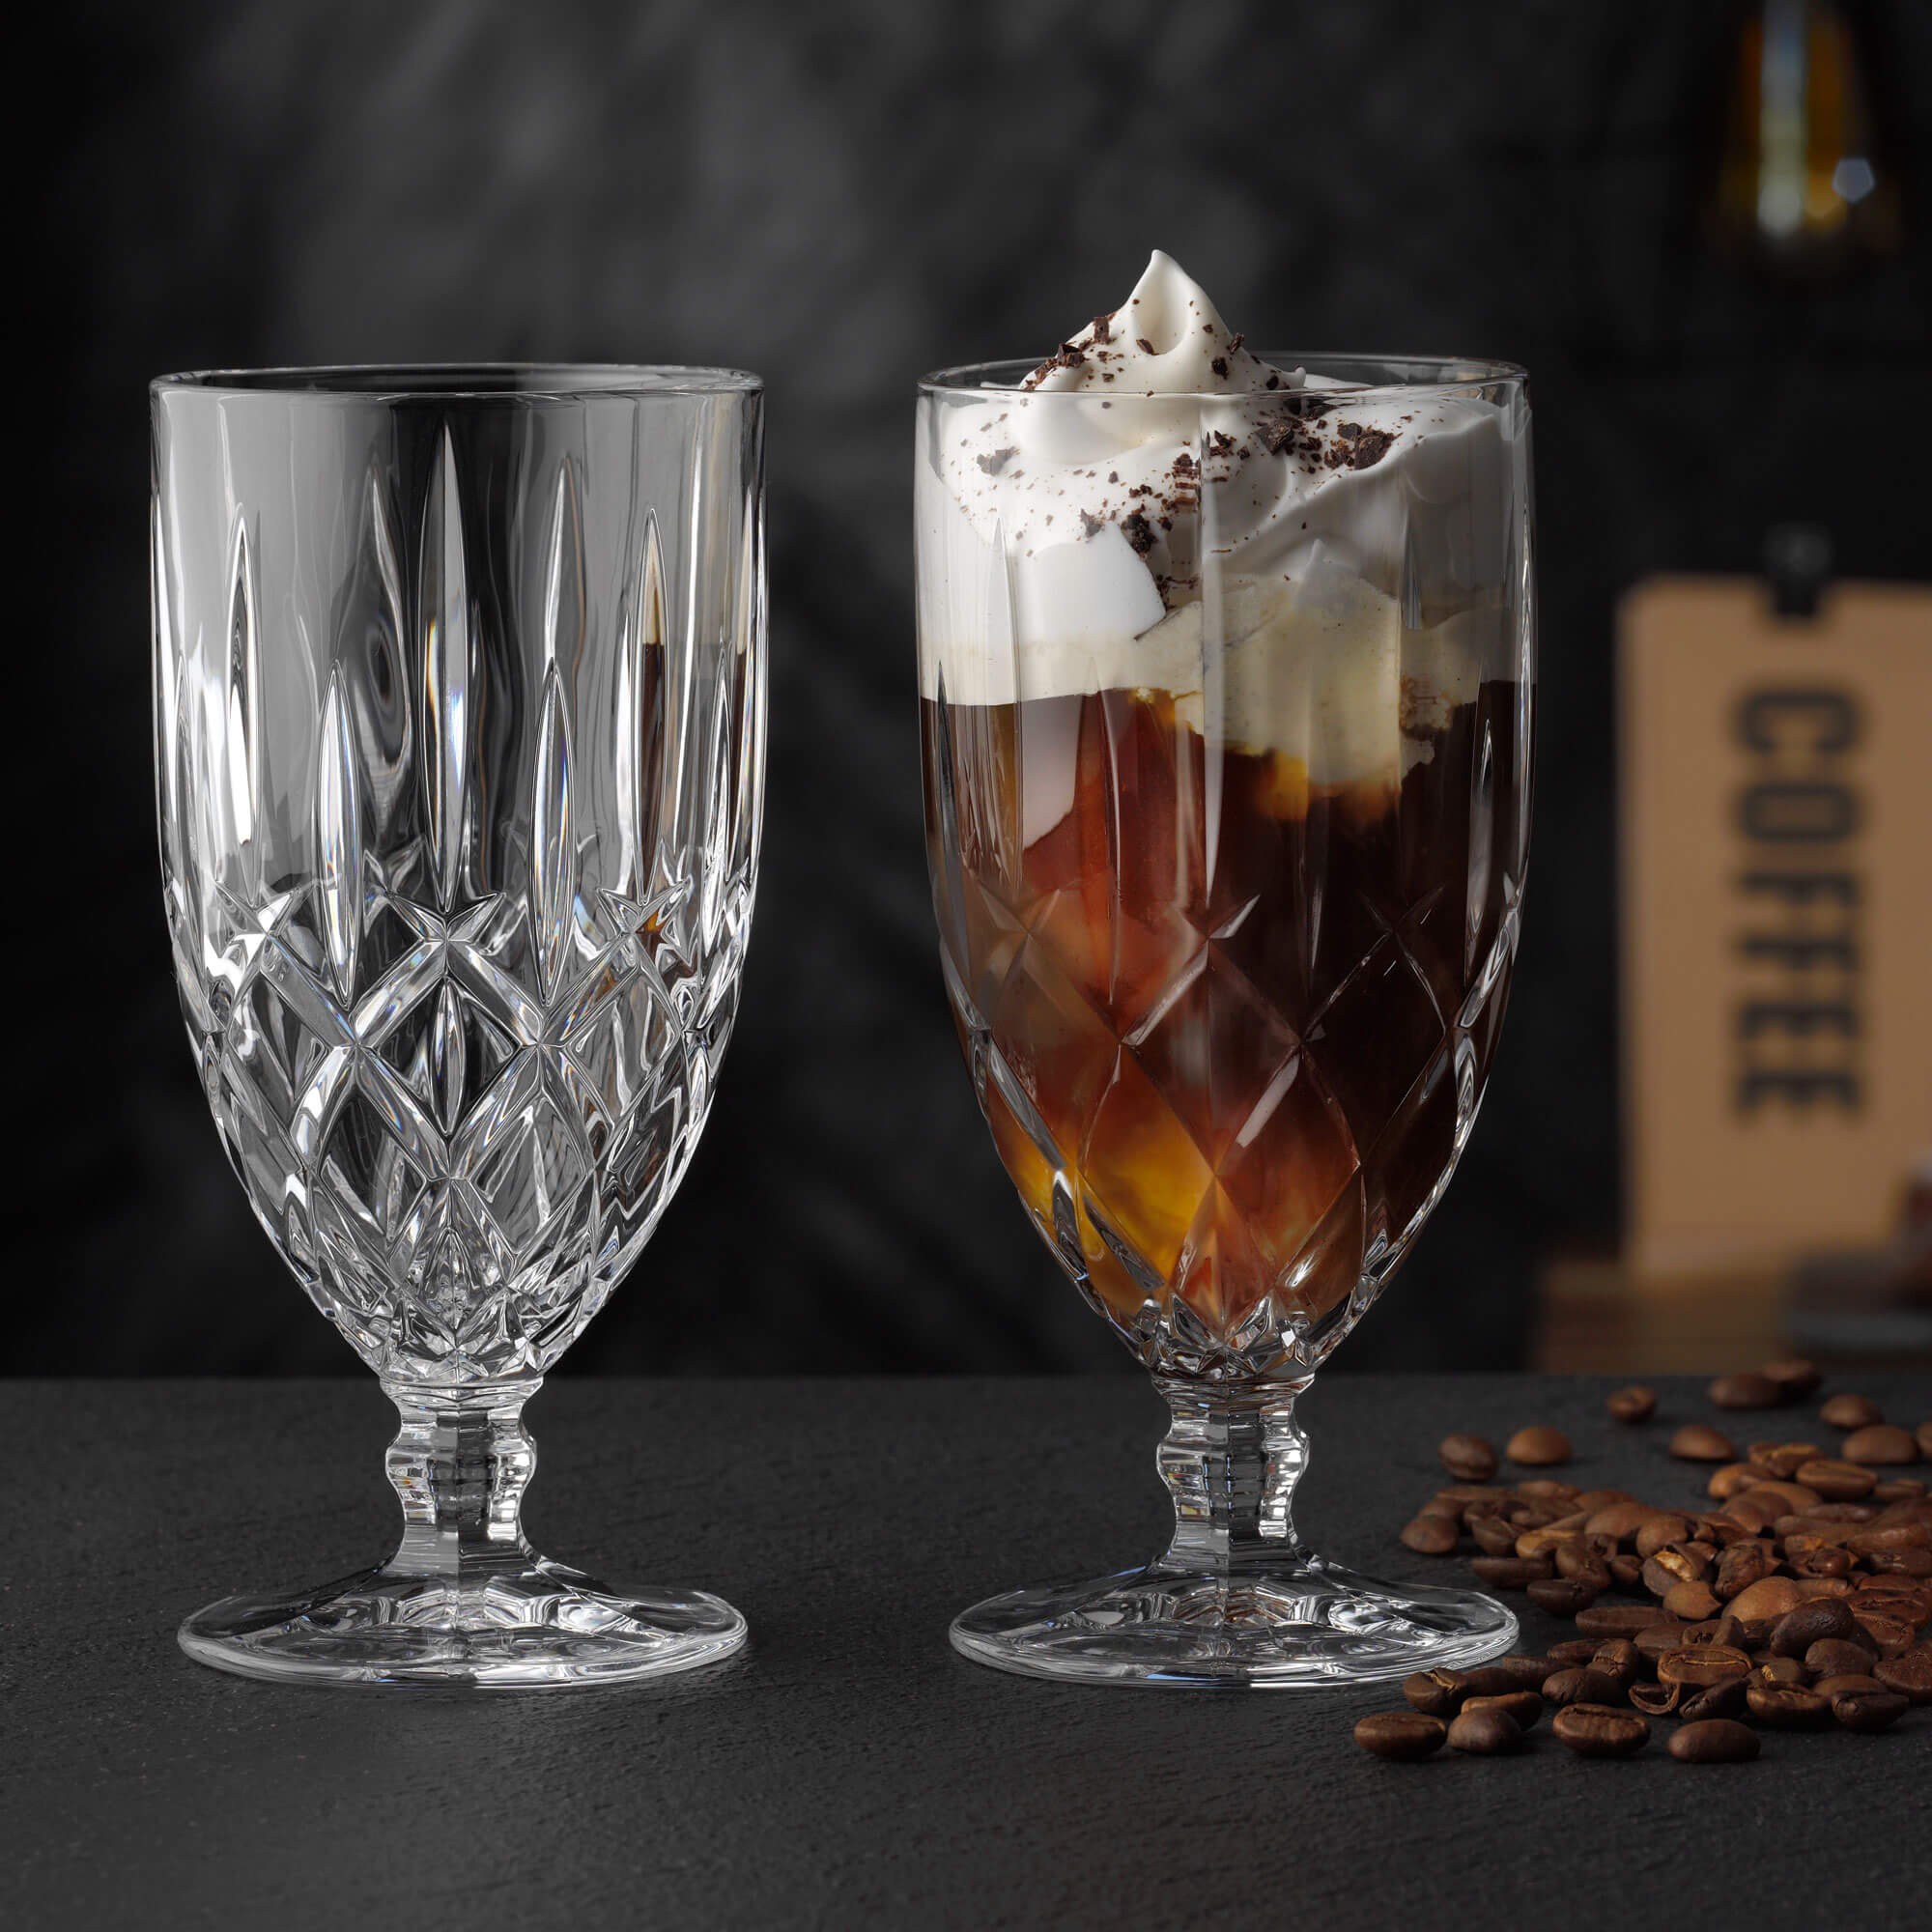 Iced coffee glass Noblesse, Nachtmann -  425ml (1 pc.)